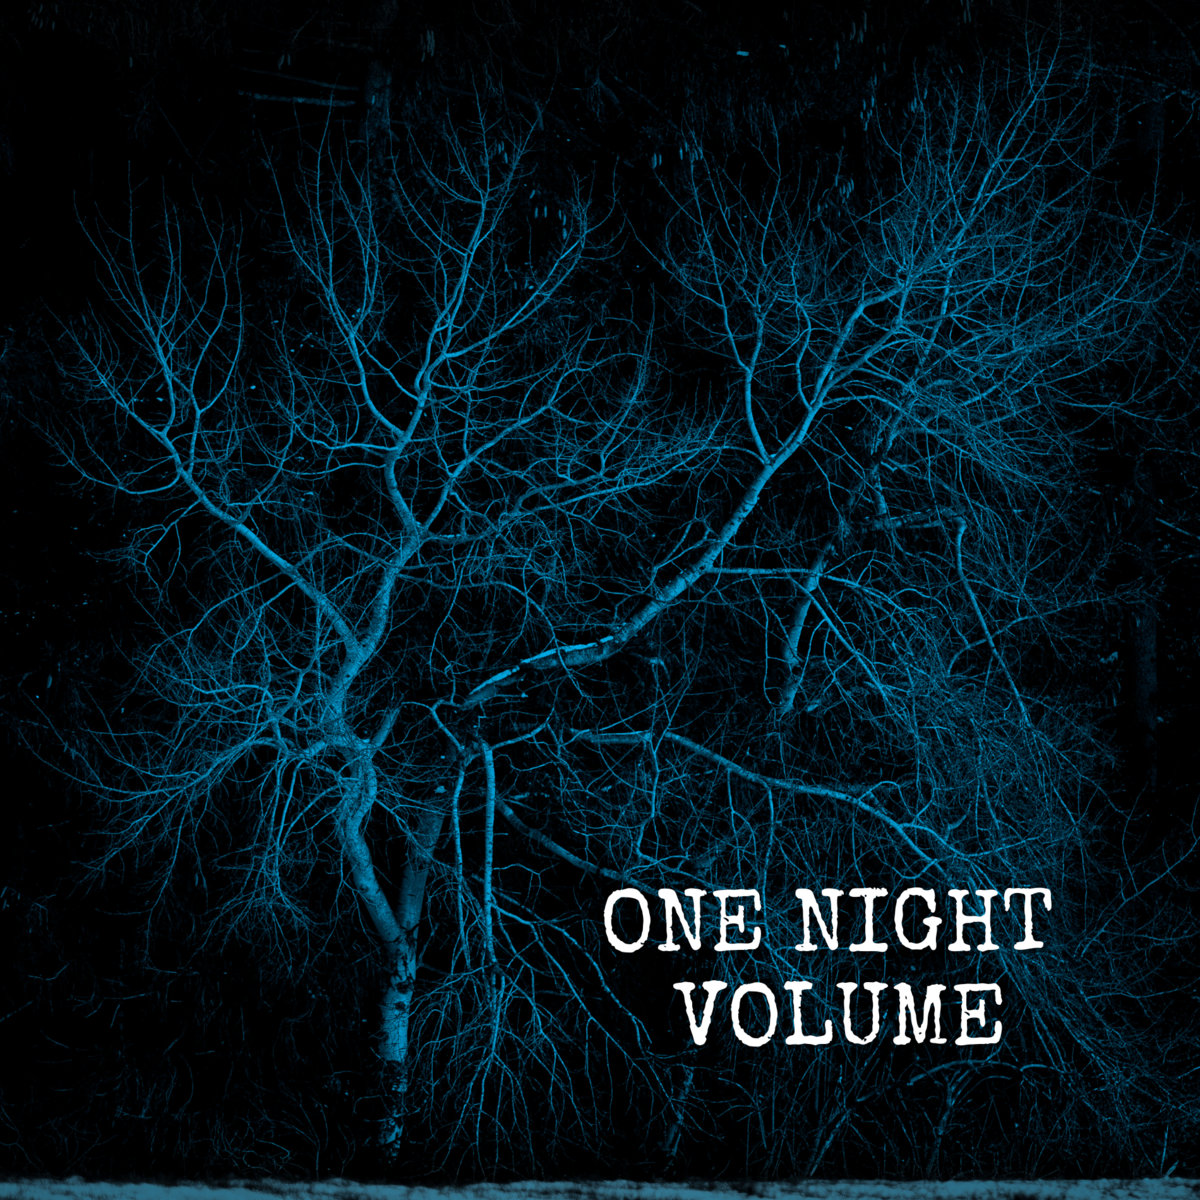 One Night Volume by ED CONLEY: Album Review